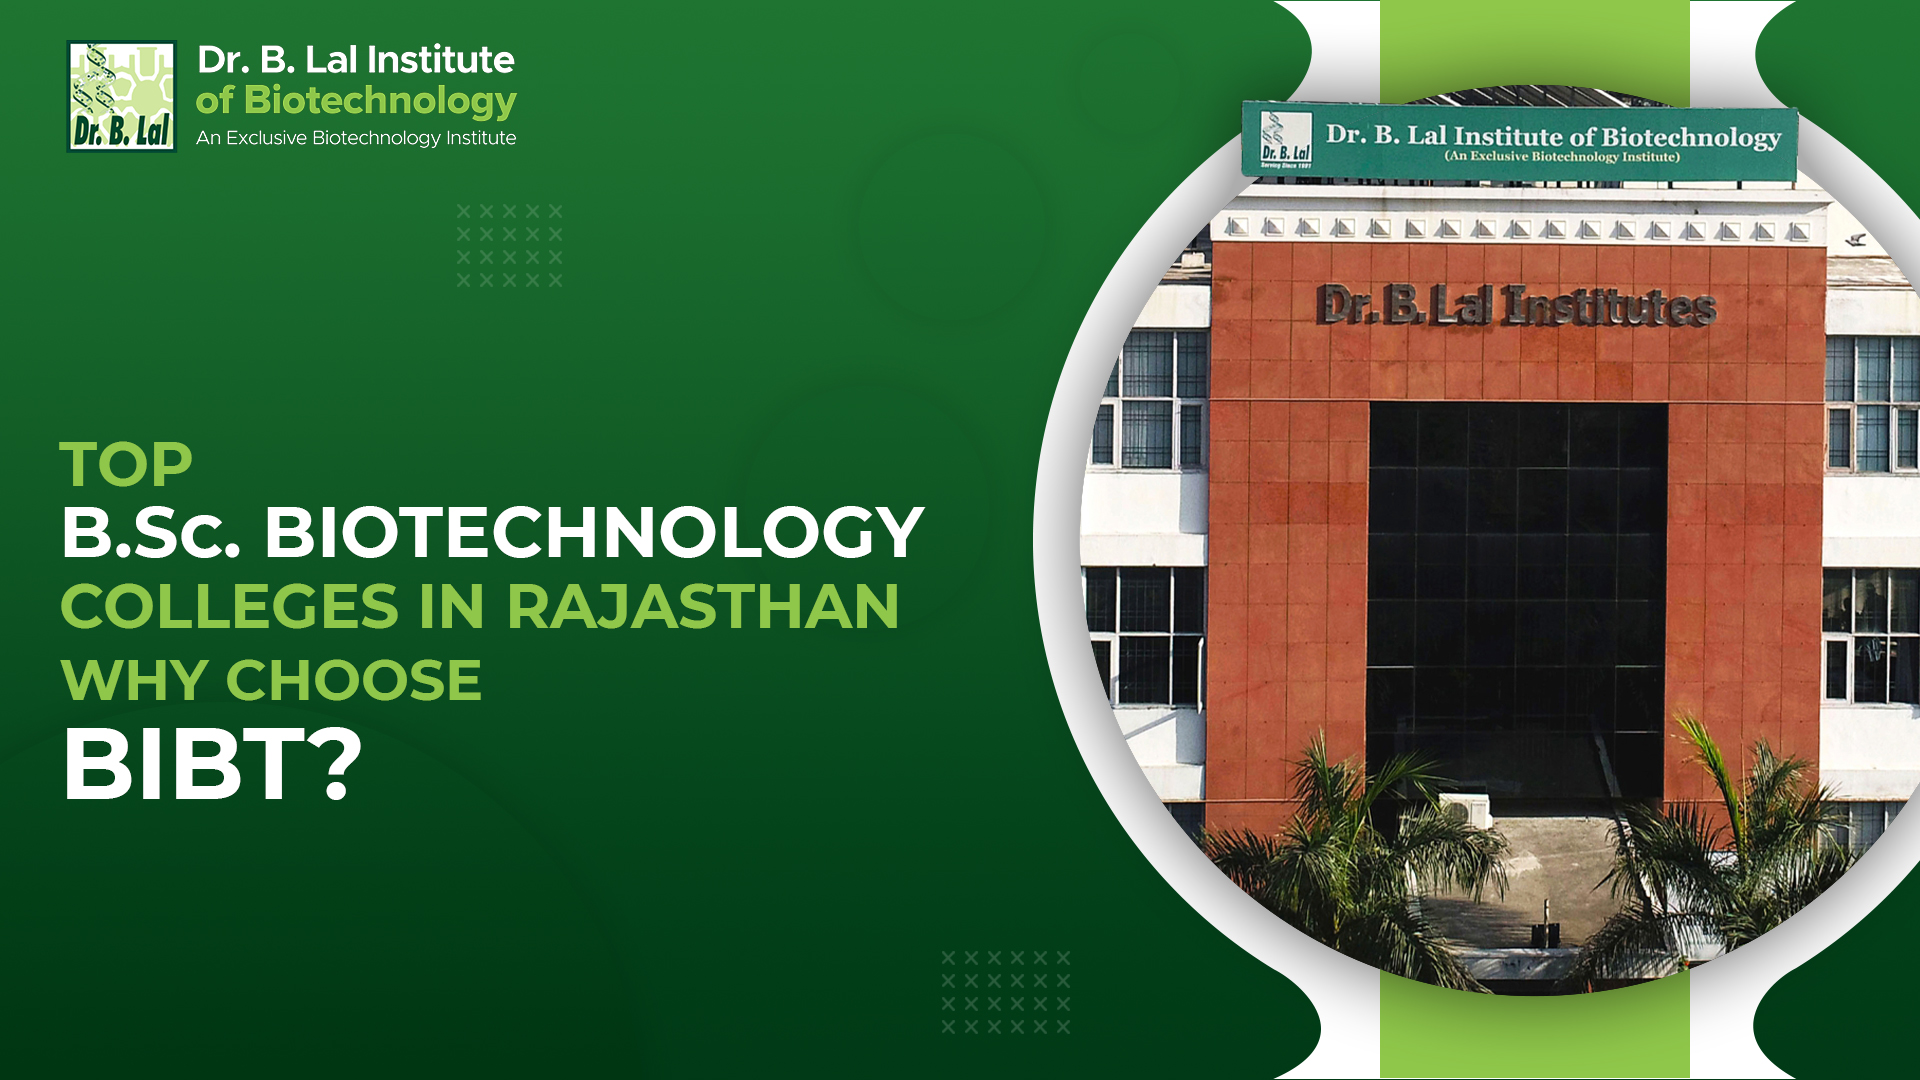 Top B.Sc. Biotechnology Colleges in Rajasthan-Why Choose BIBT?